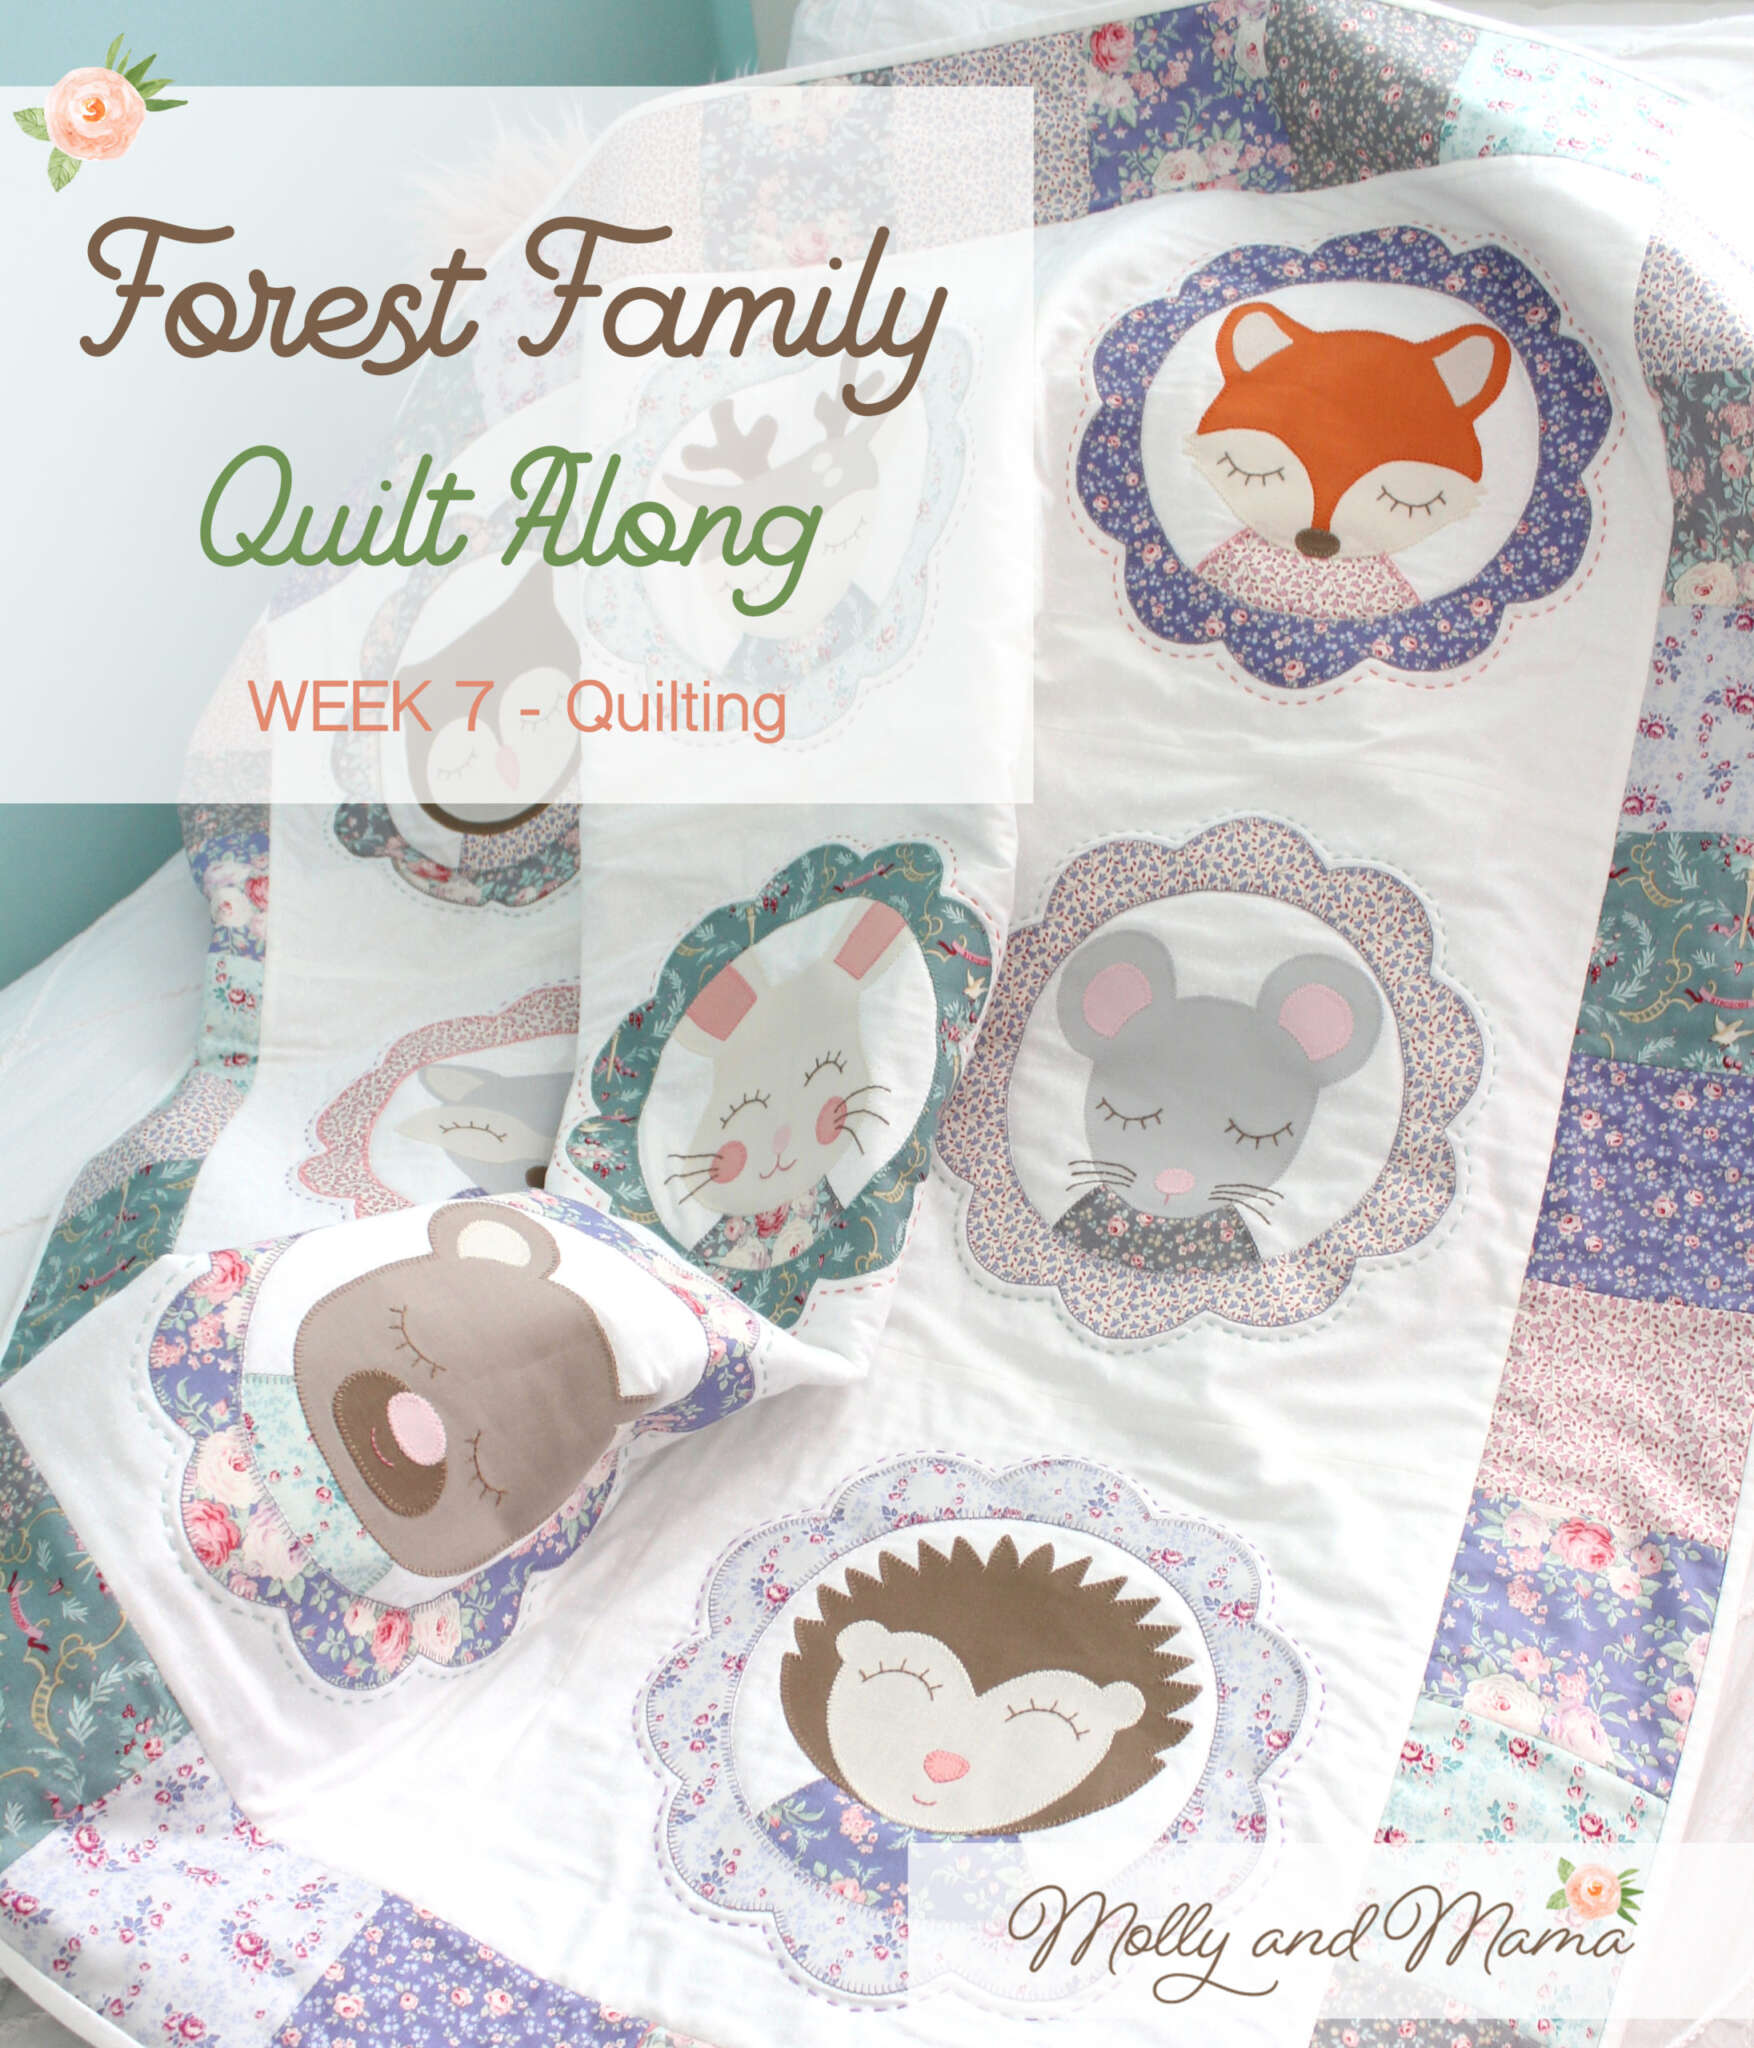 Week 7 – Forest Family Quilt Along